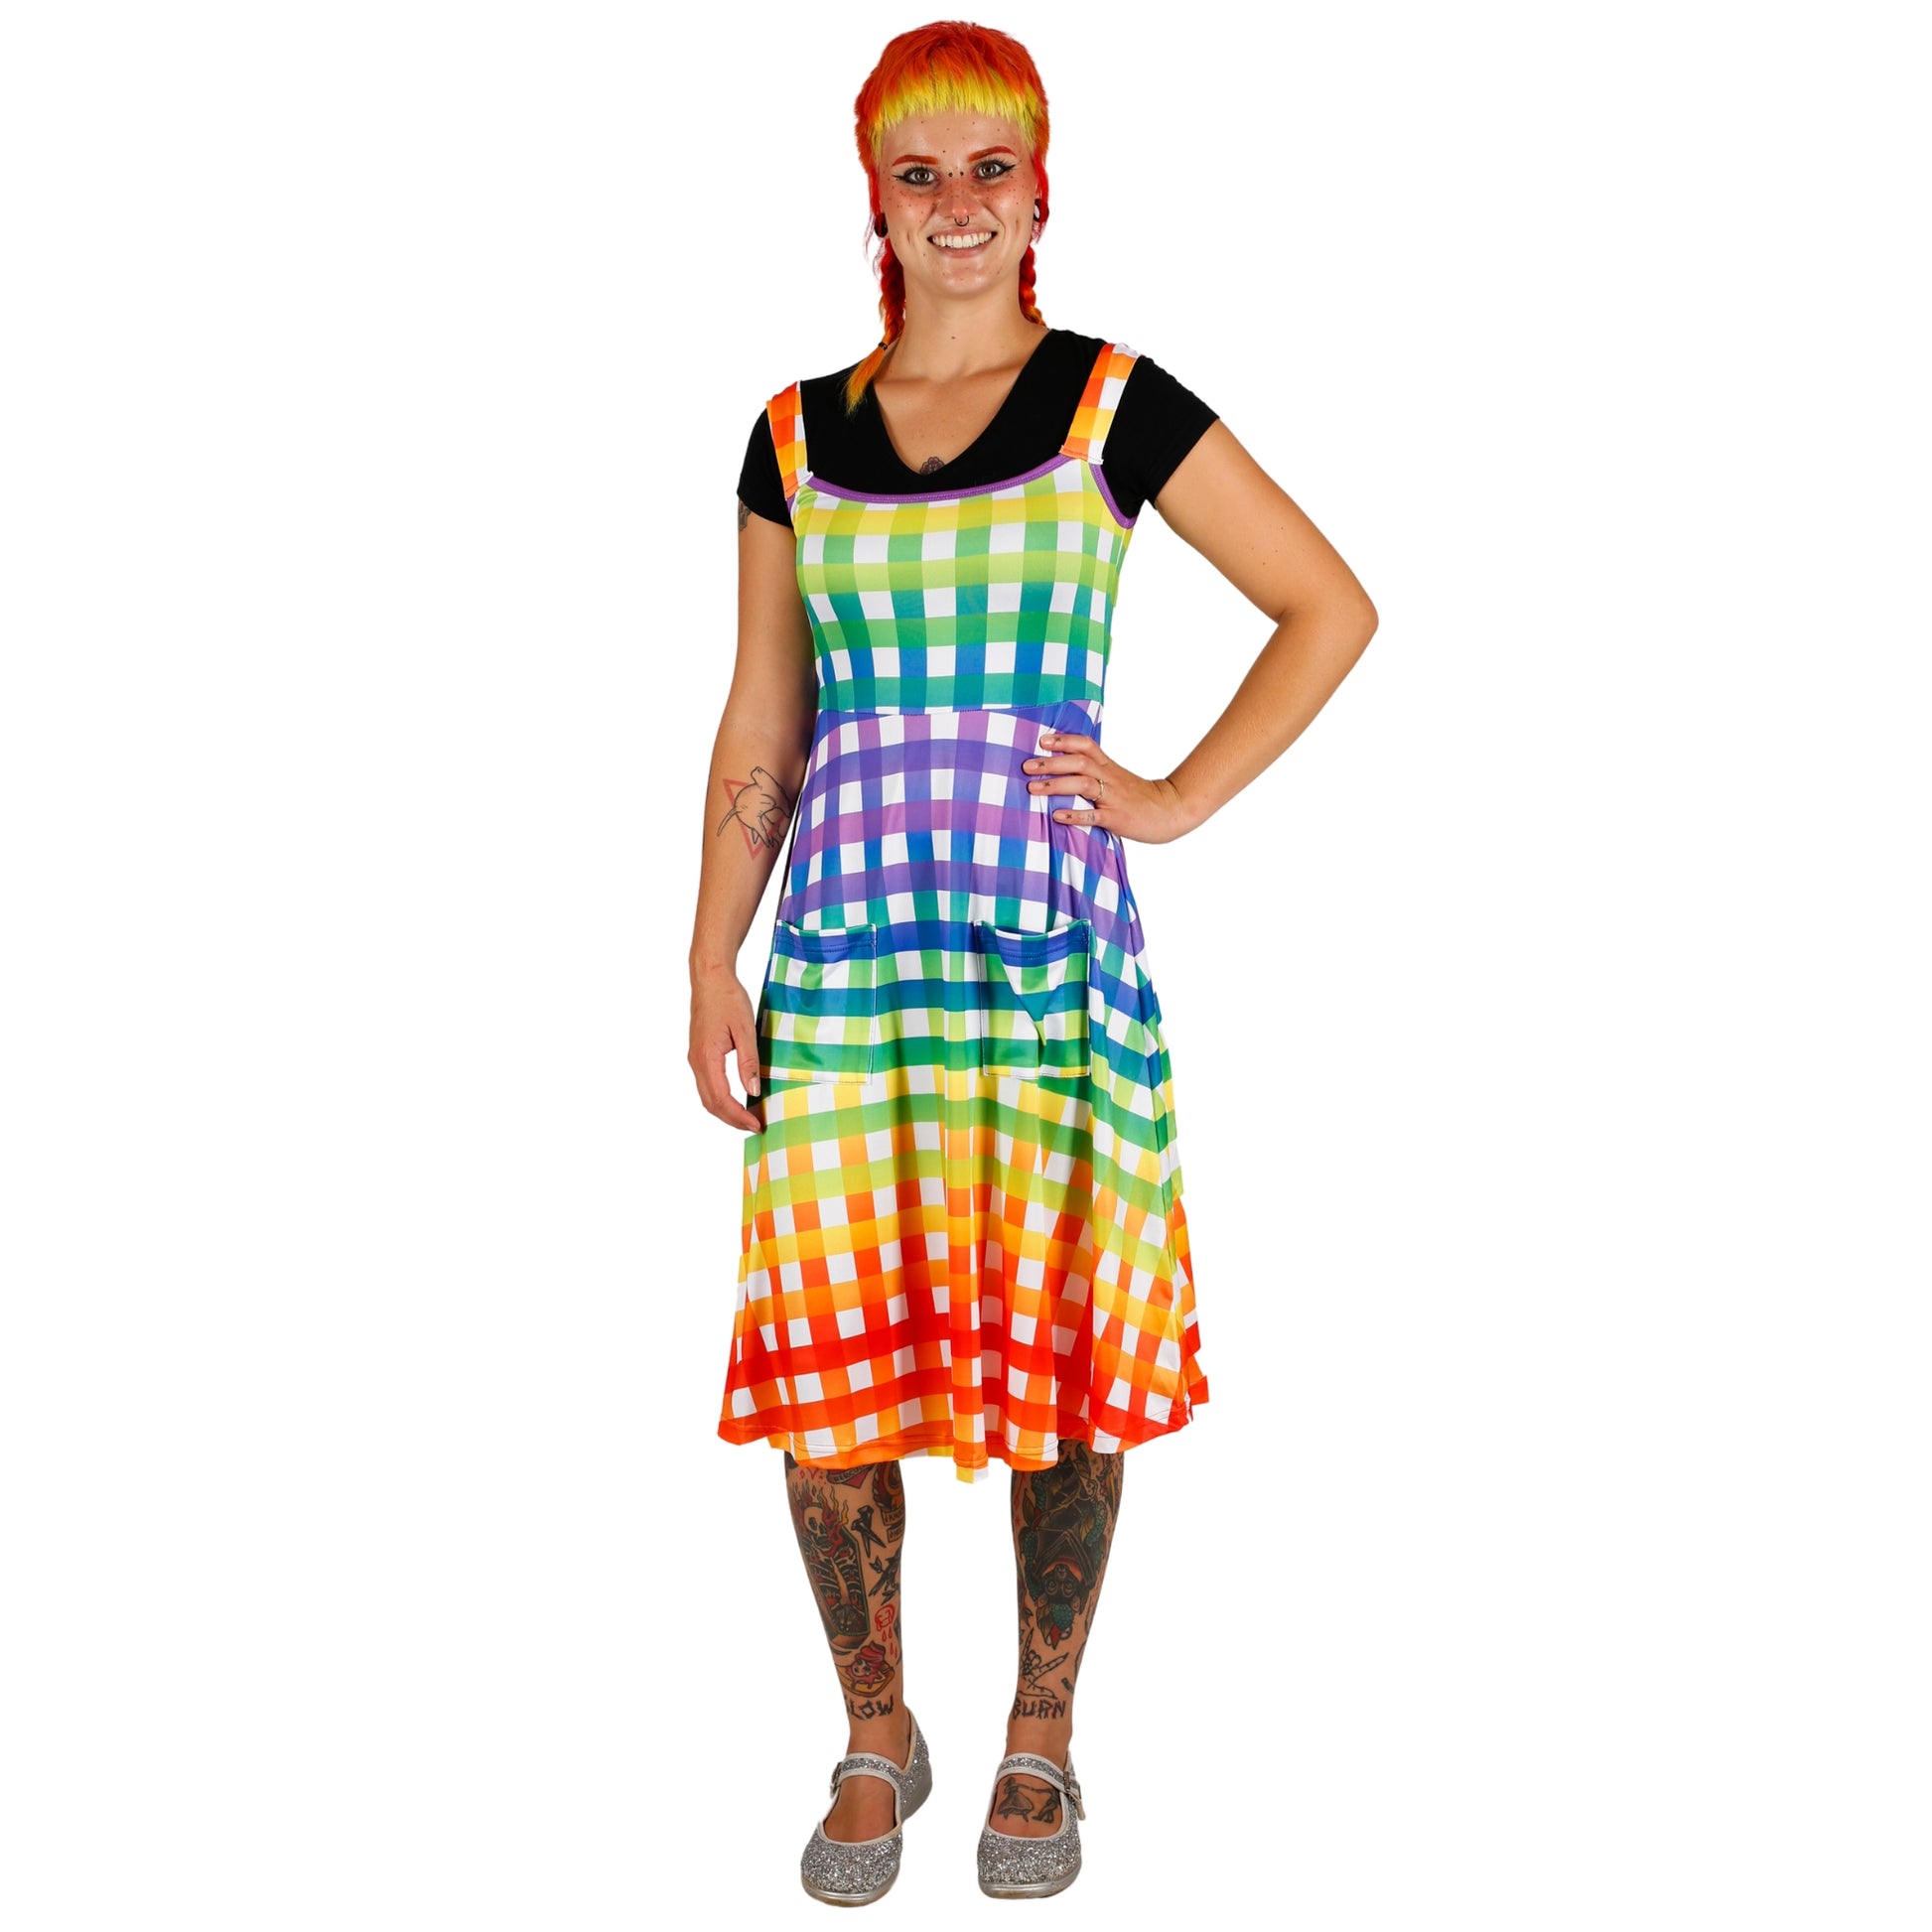 Rainbow Gingham Pinafore by RainbowsAndFairies.com.au (Check - Pride - Psychedelic - Dress With Pockets - Pinny - Kitsch - Vintage Inspired) - SKU: CL_PFORE_GINGH_RBW - Pic-04